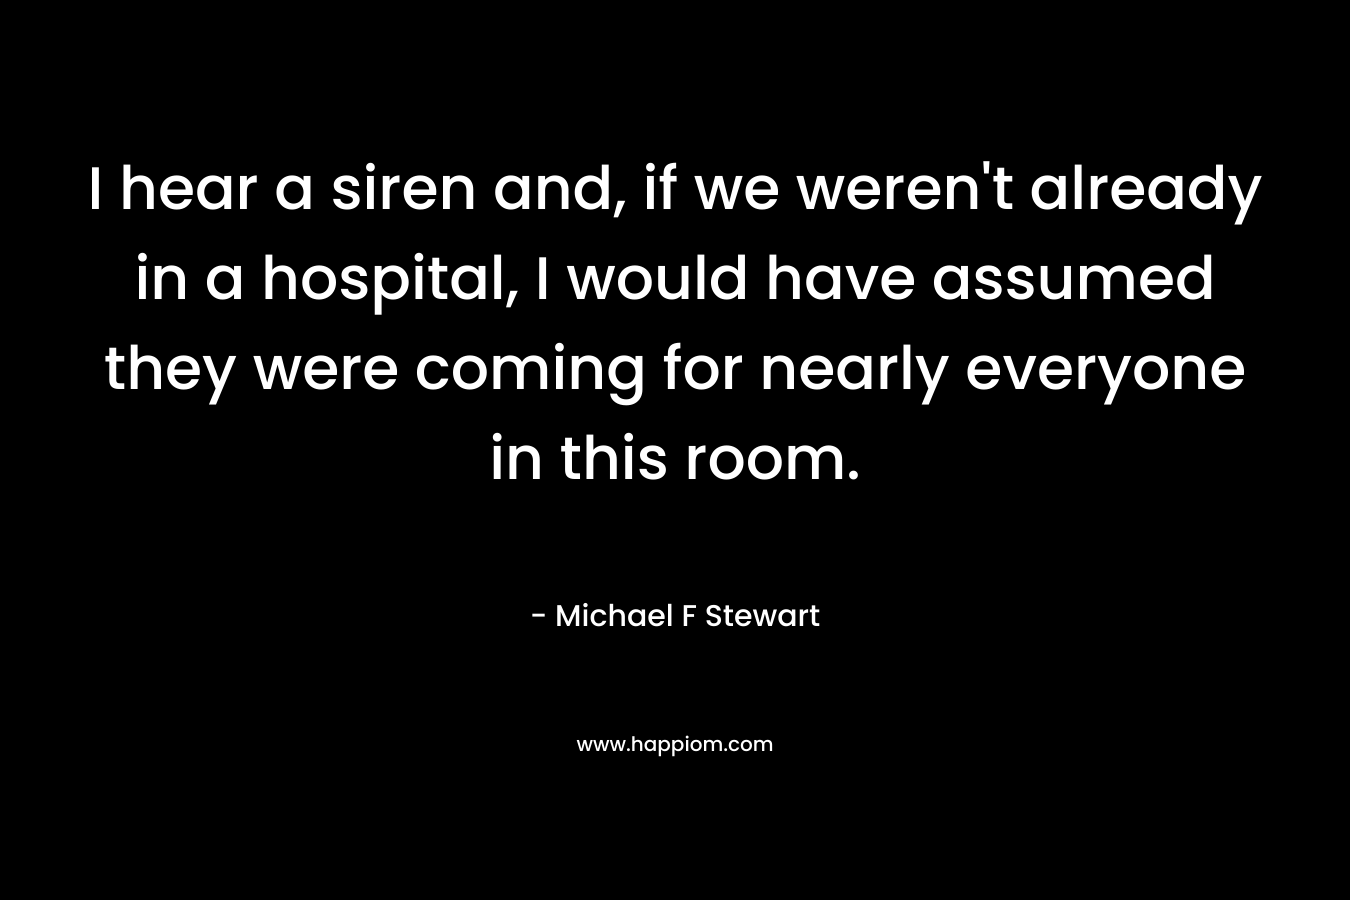 I hear a siren and, if we weren’t already in a hospital, I would have assumed they were coming for nearly everyone in this room. – Michael F Stewart